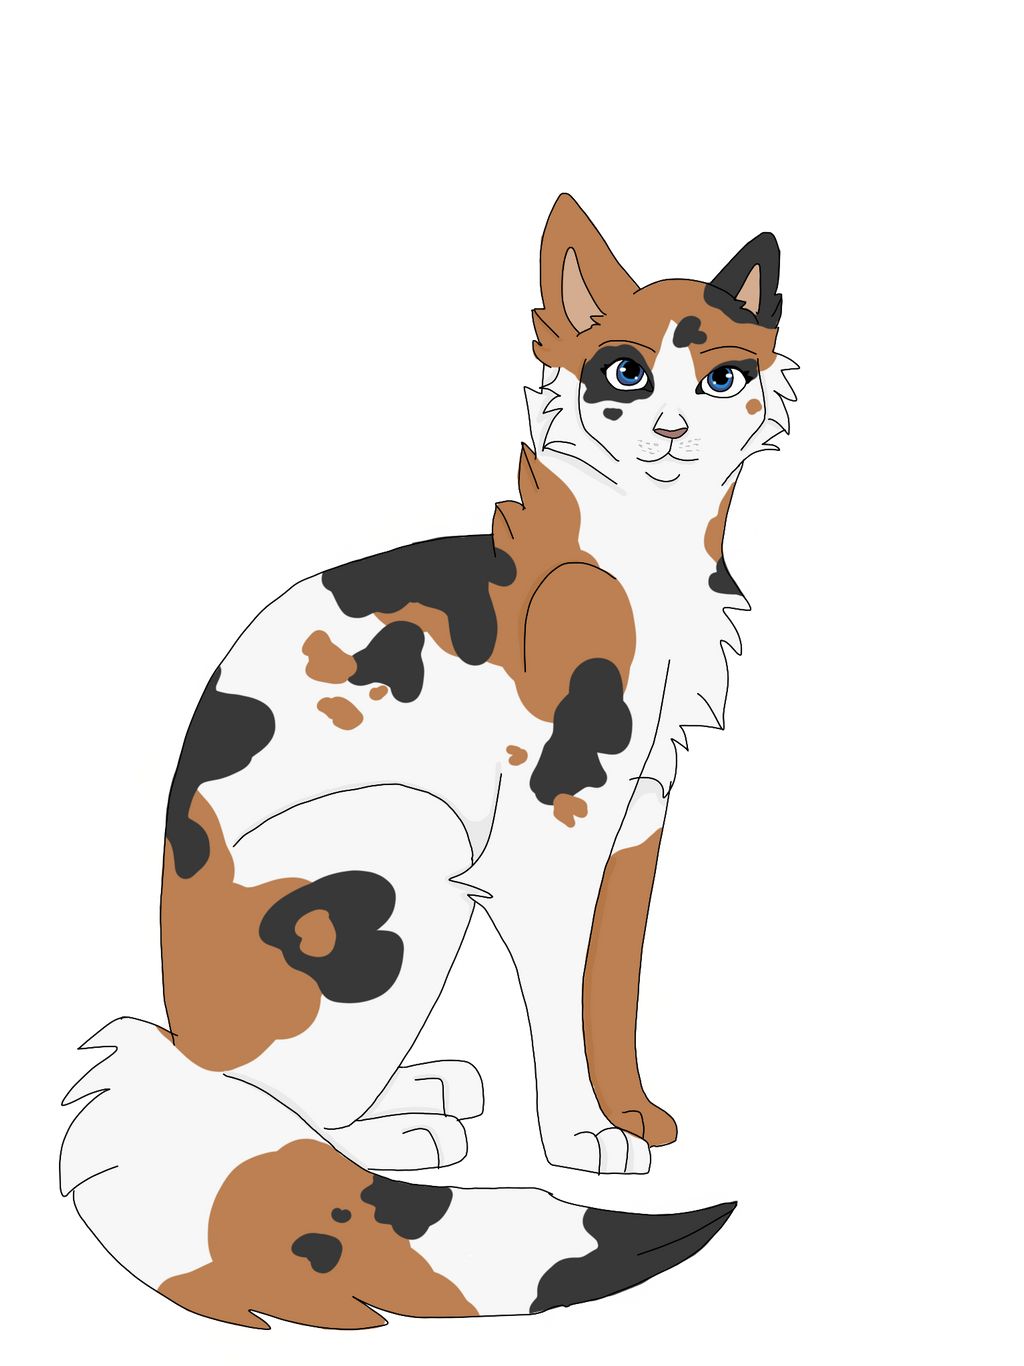 Calico cat by trahere on DeviantArt